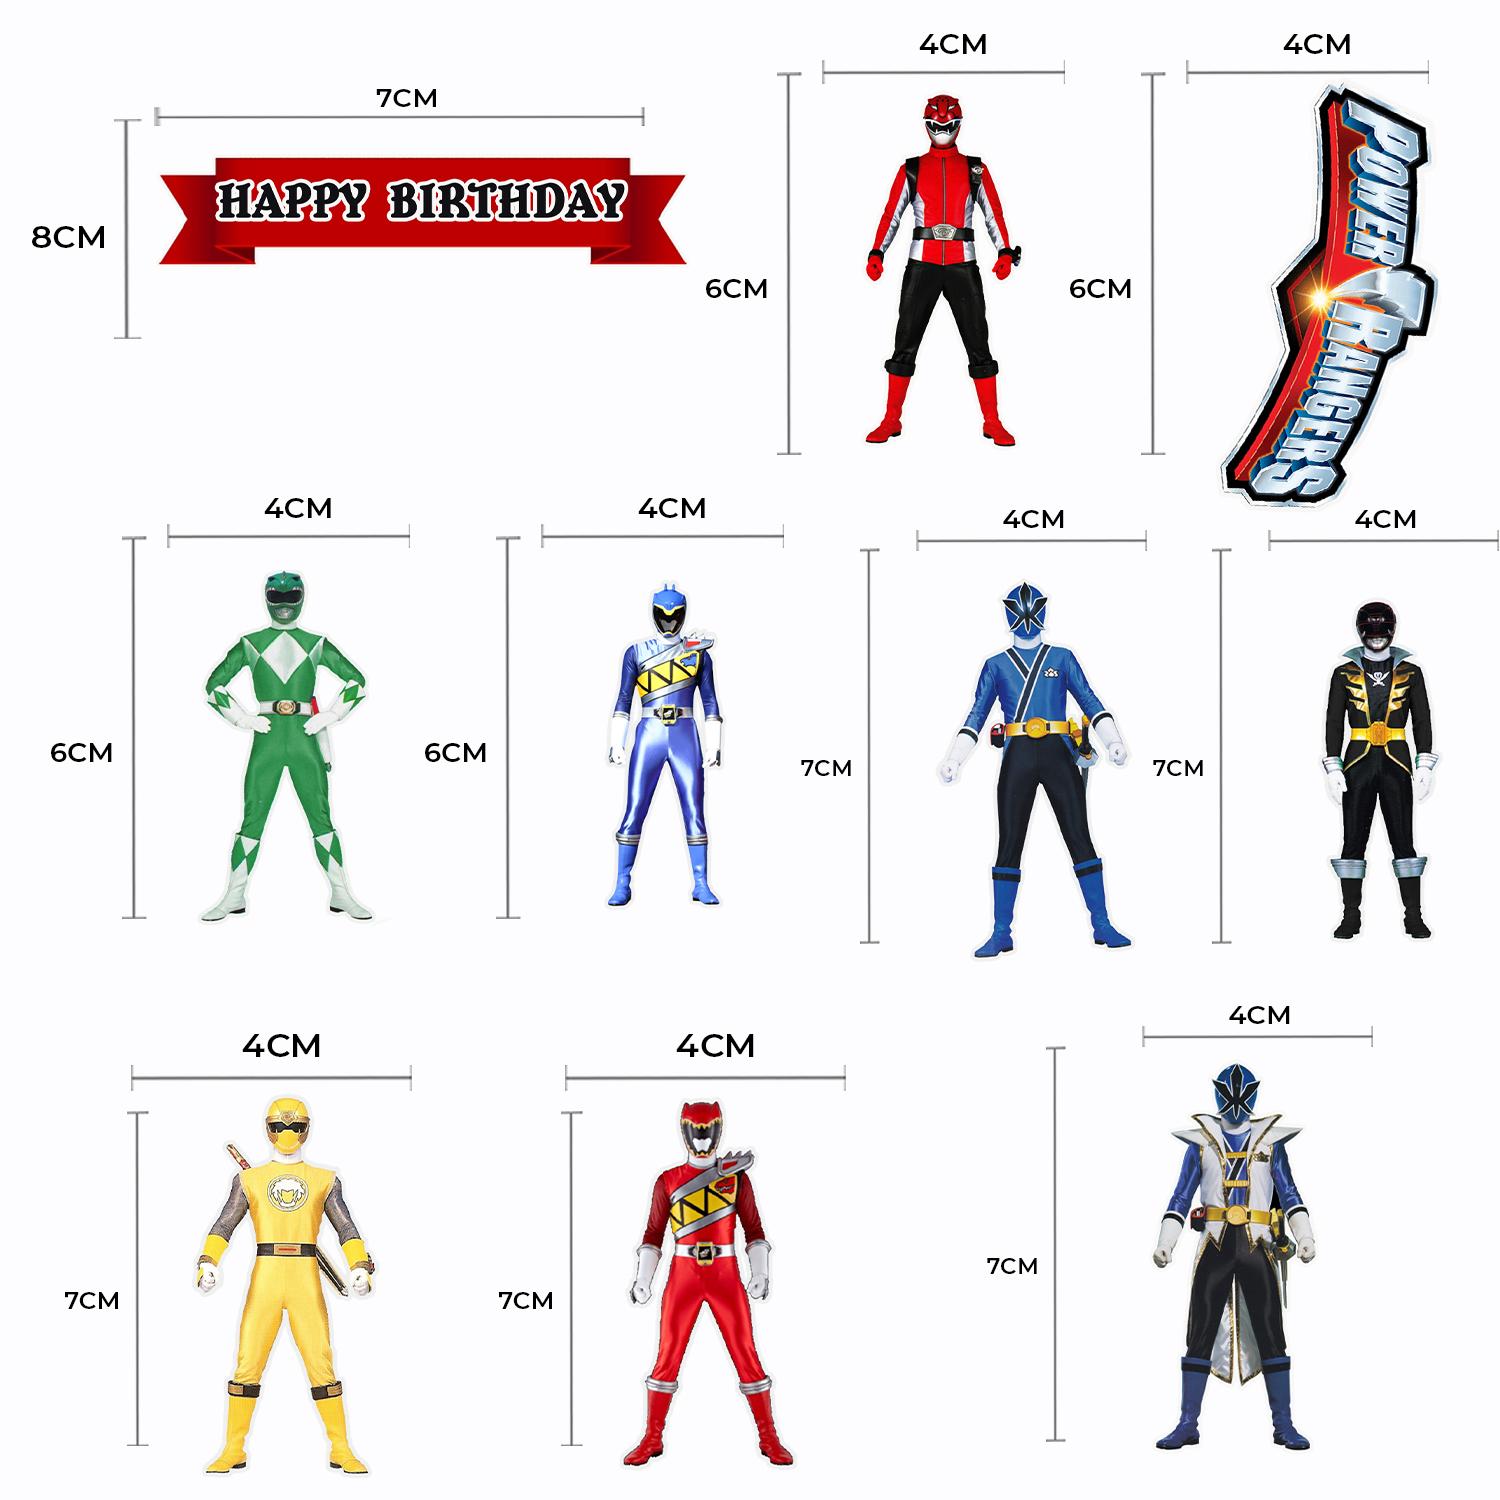 CARDSTOCK PAPER TOPPER A4 POWER RANGERS